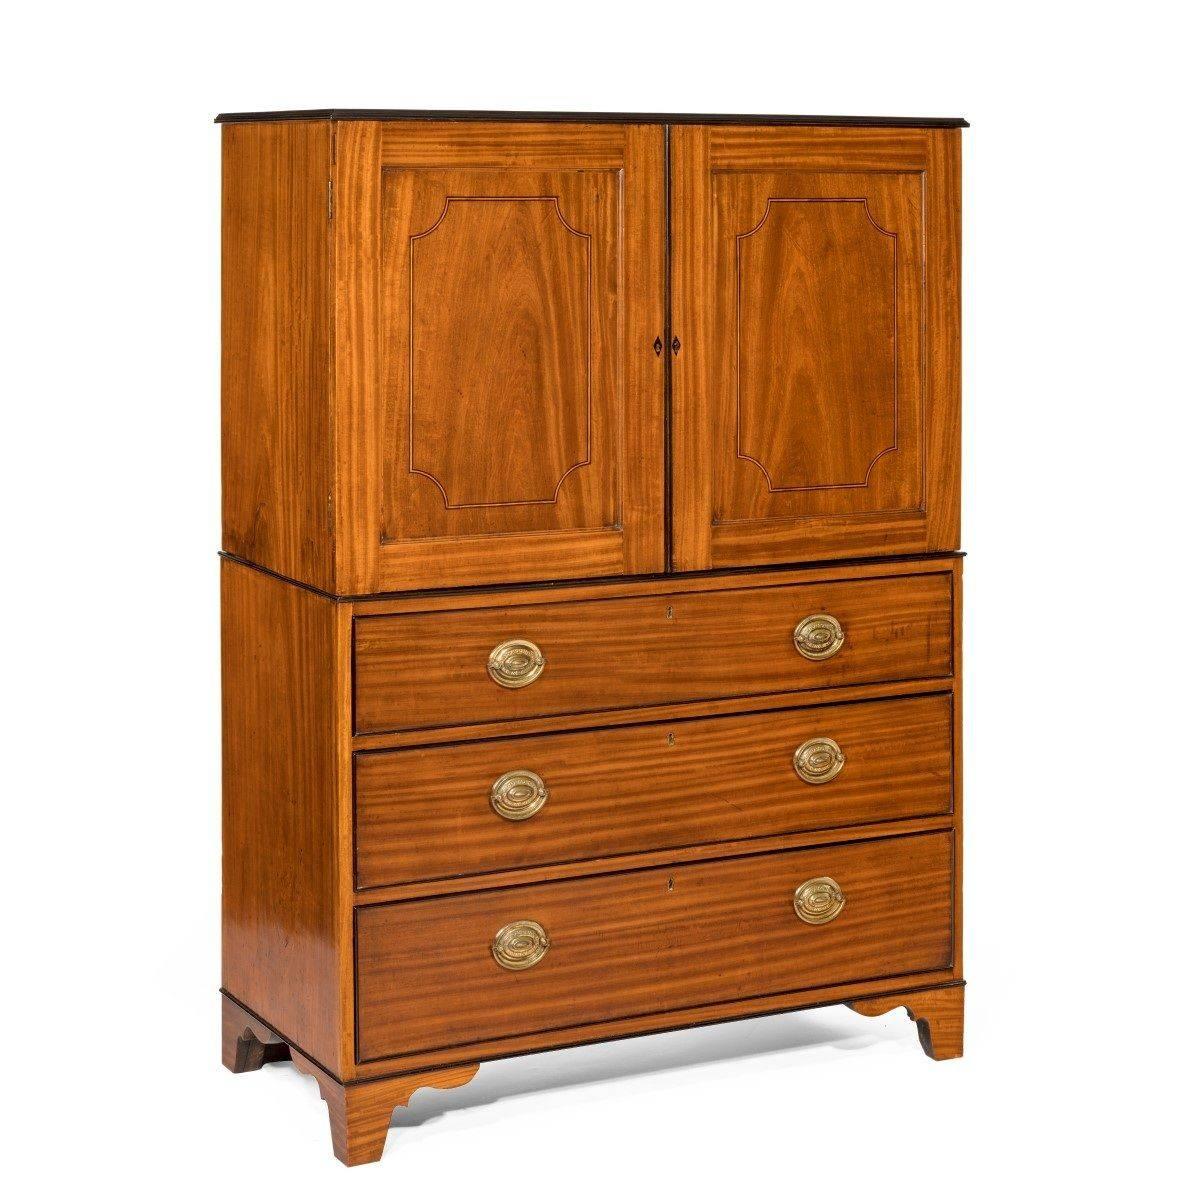 This satinwood and ebony ship’s cabinet has an upper section with two cupboard doors opening to reveal eighteen graduated small drawers with ebony handles and stringing.

The lower section comprises a chest of three long drawers, similarly edged and